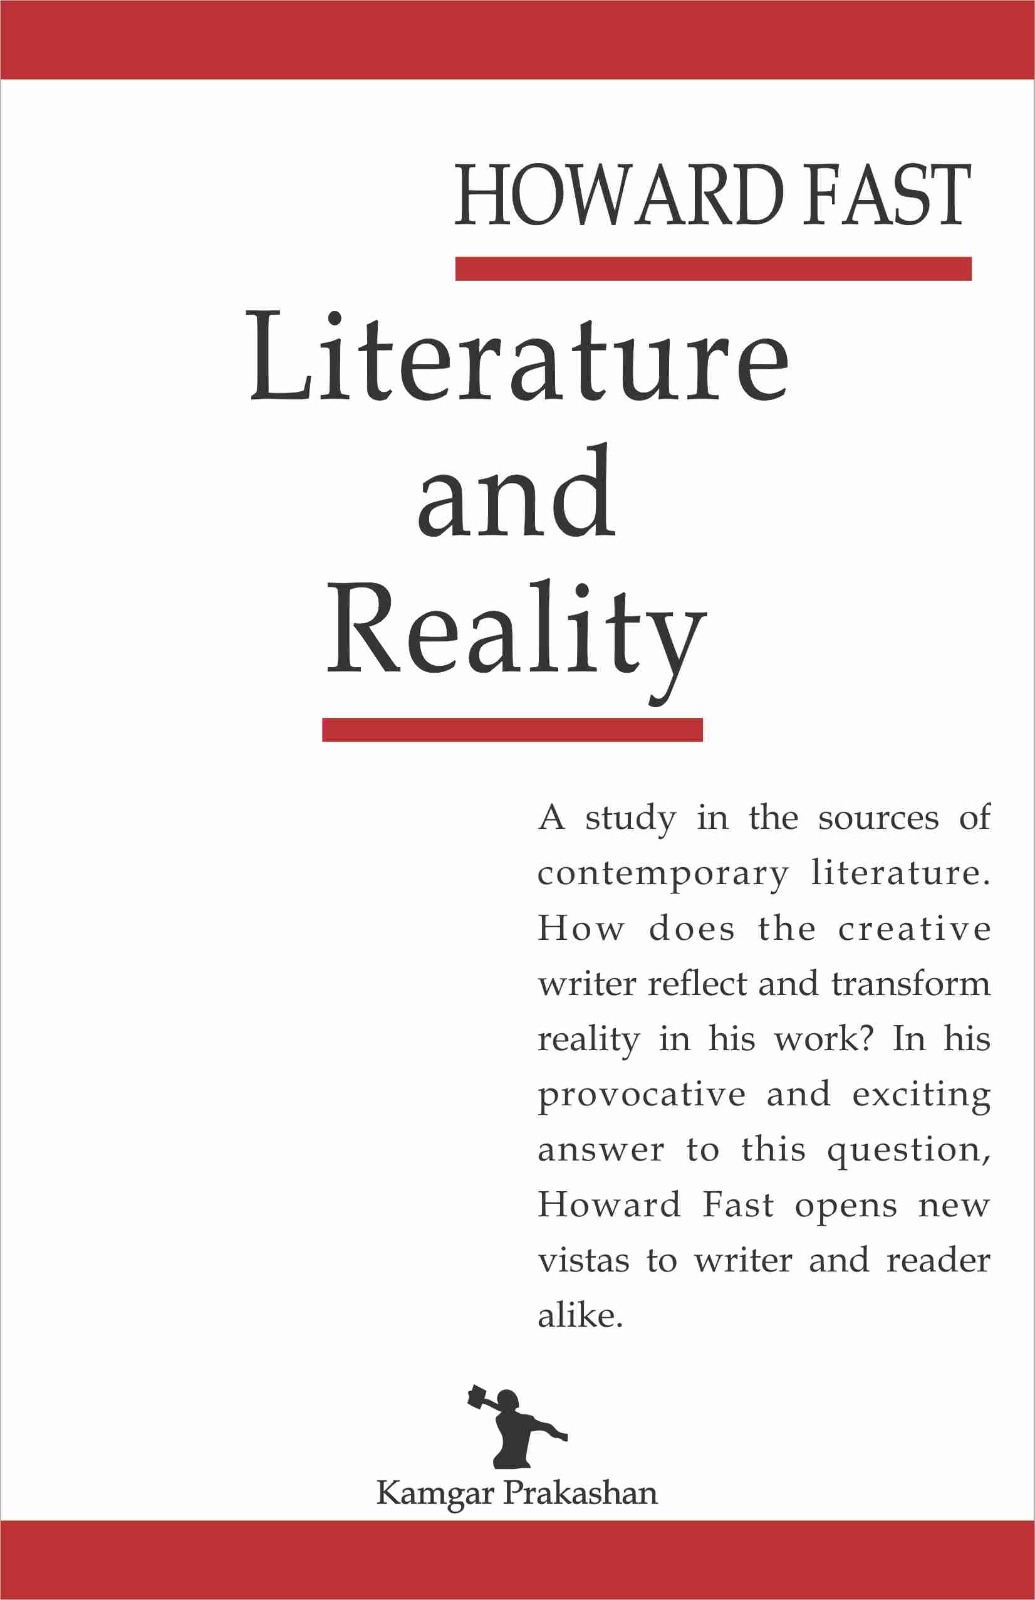 LITERATURE AND REALITY